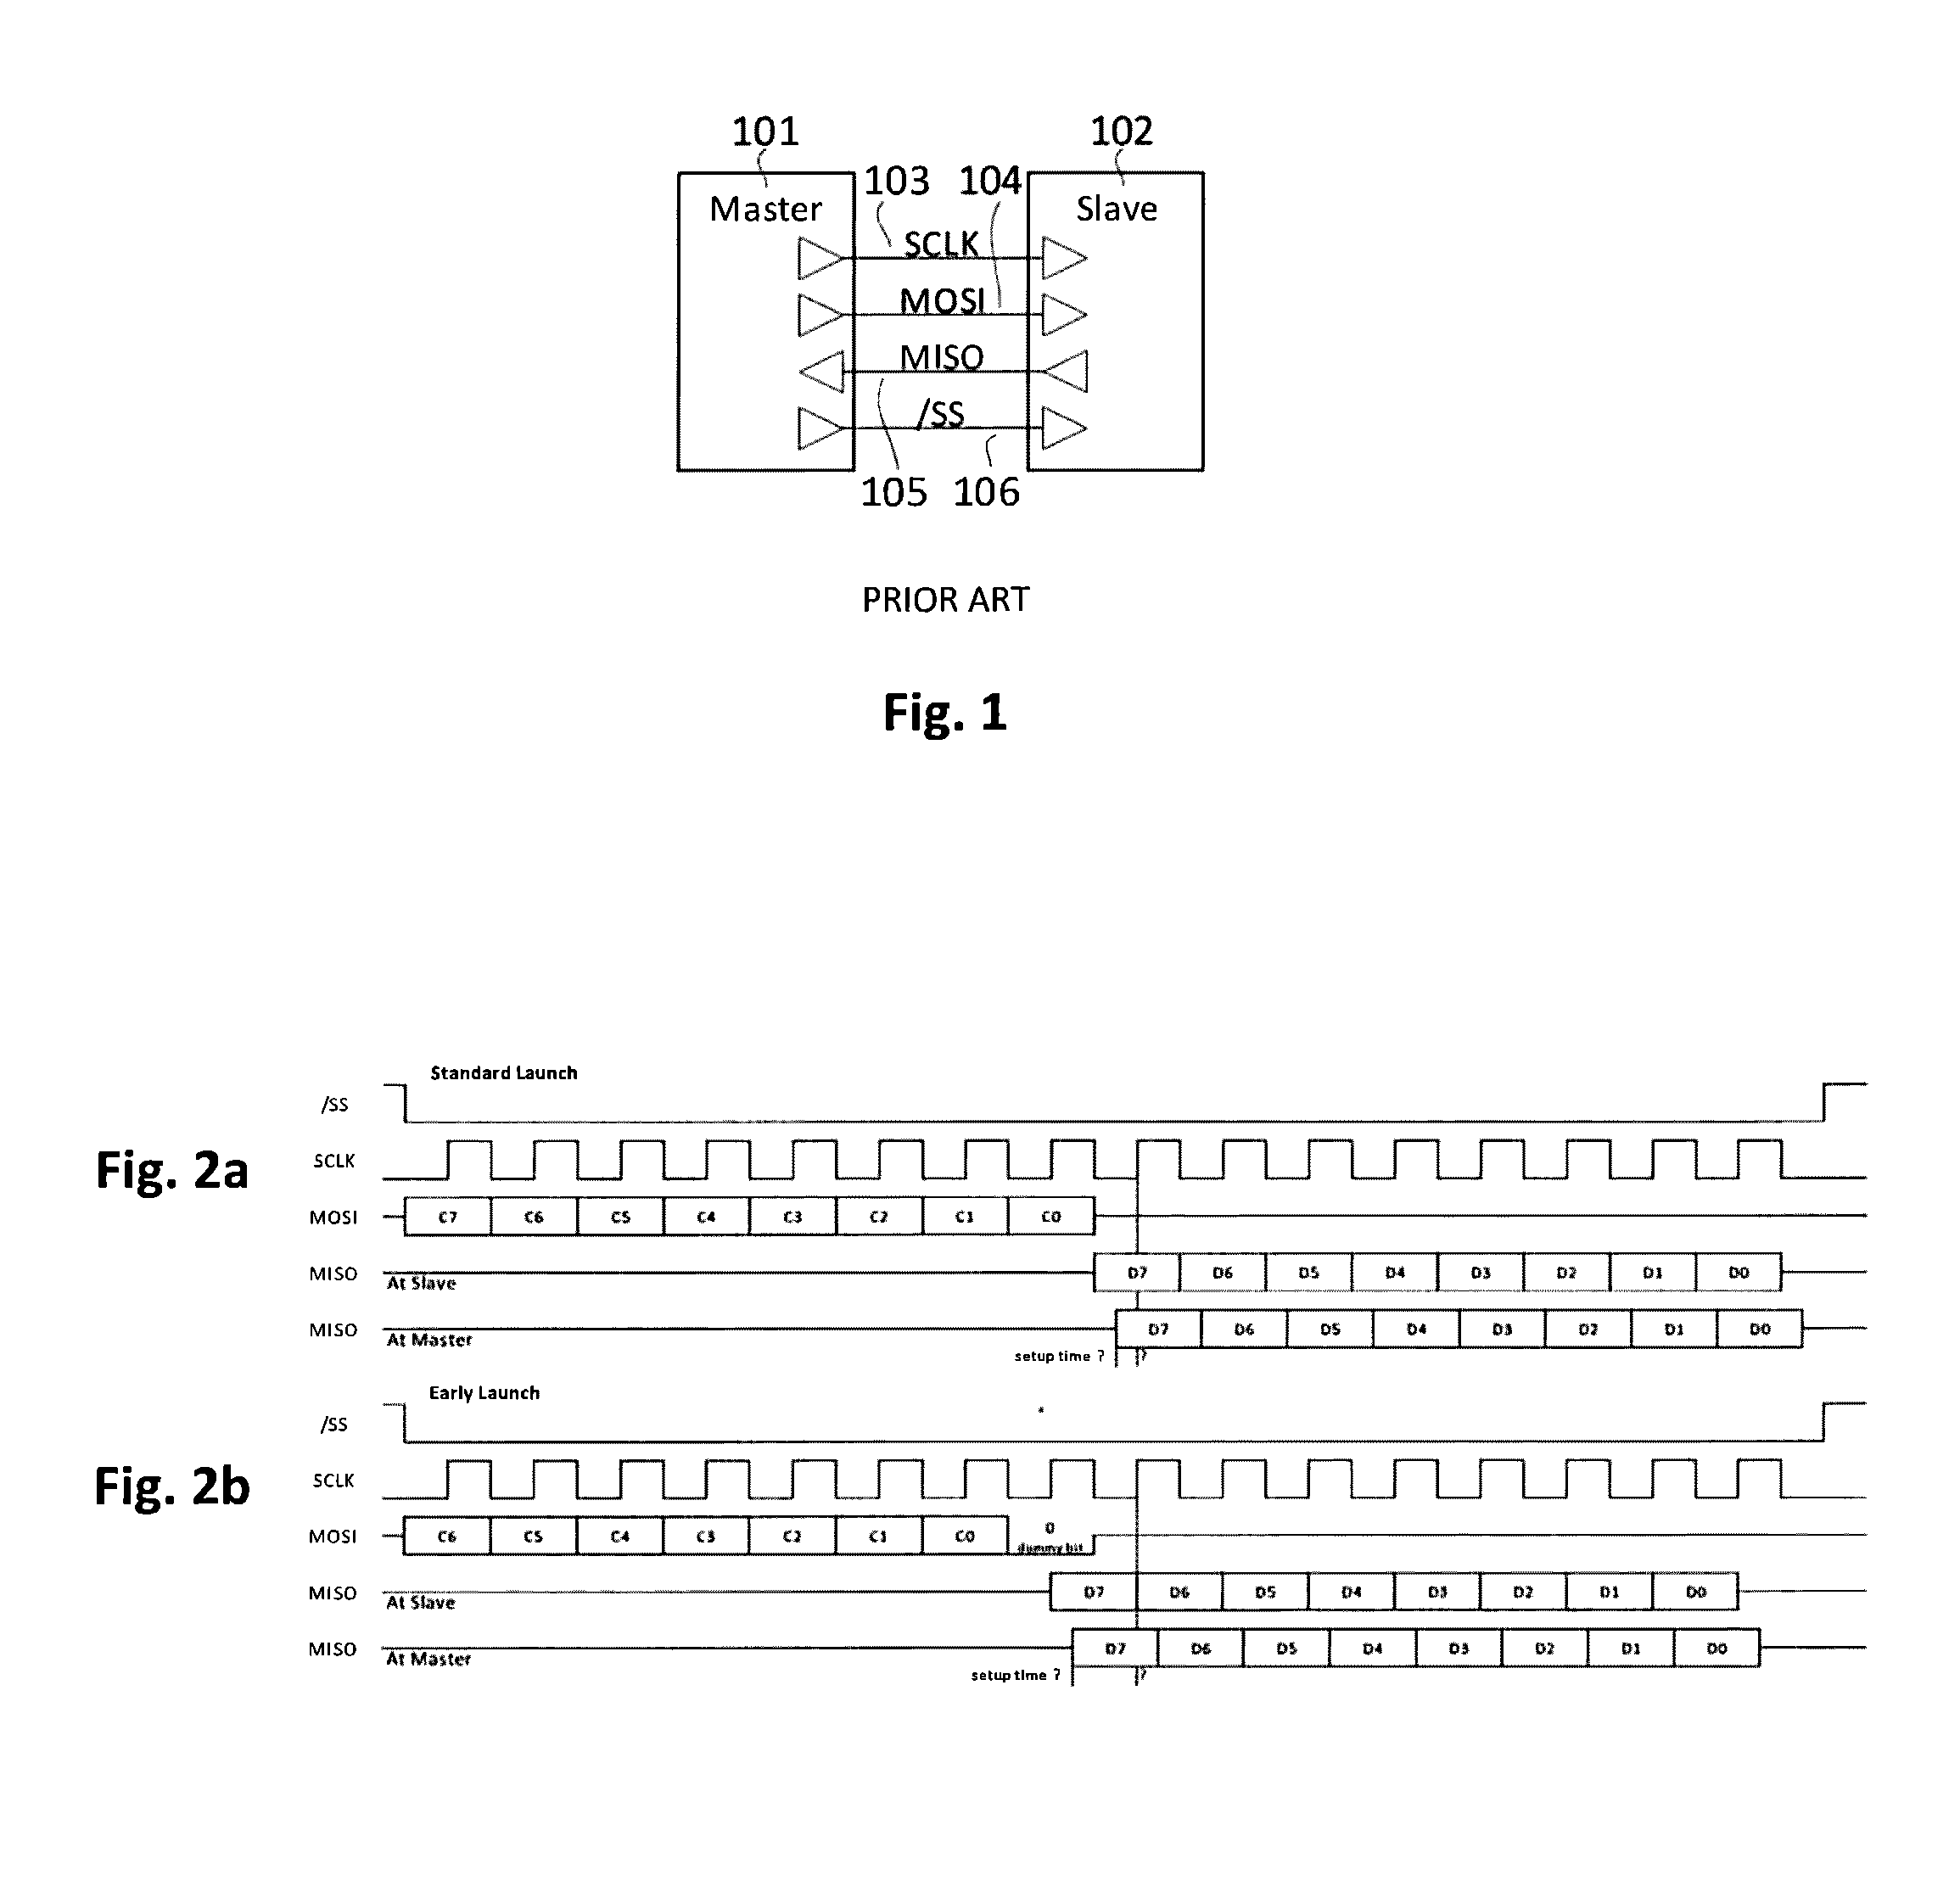 Method for improving the performance of synchronous serial interfaces